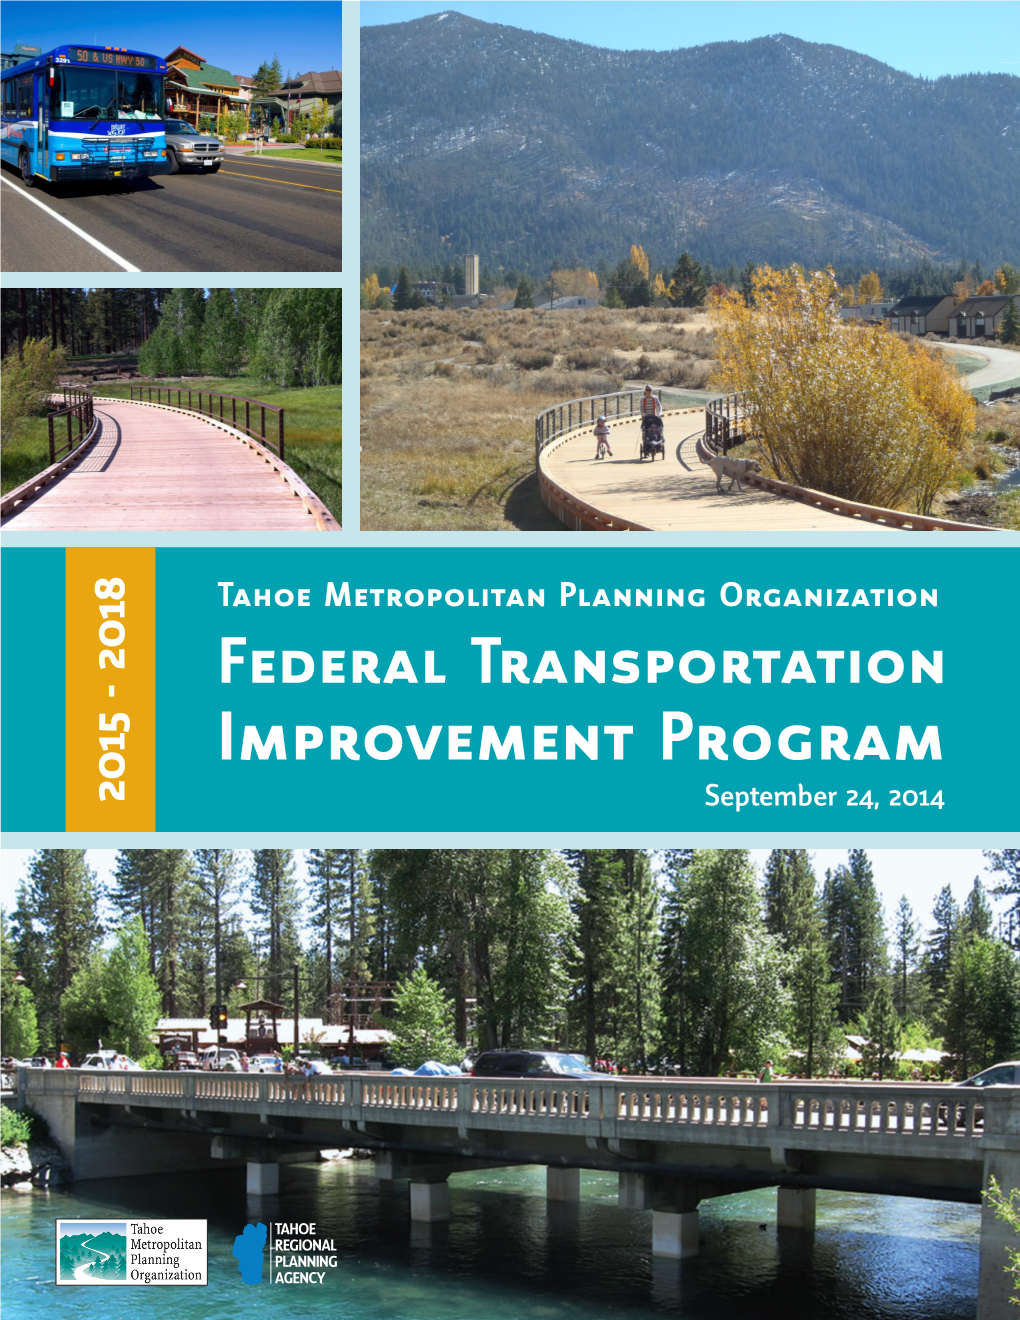 2015 FTIP Meets All Applicable Transportation Planning Requirements Per Title 23 CFR Part 450; And